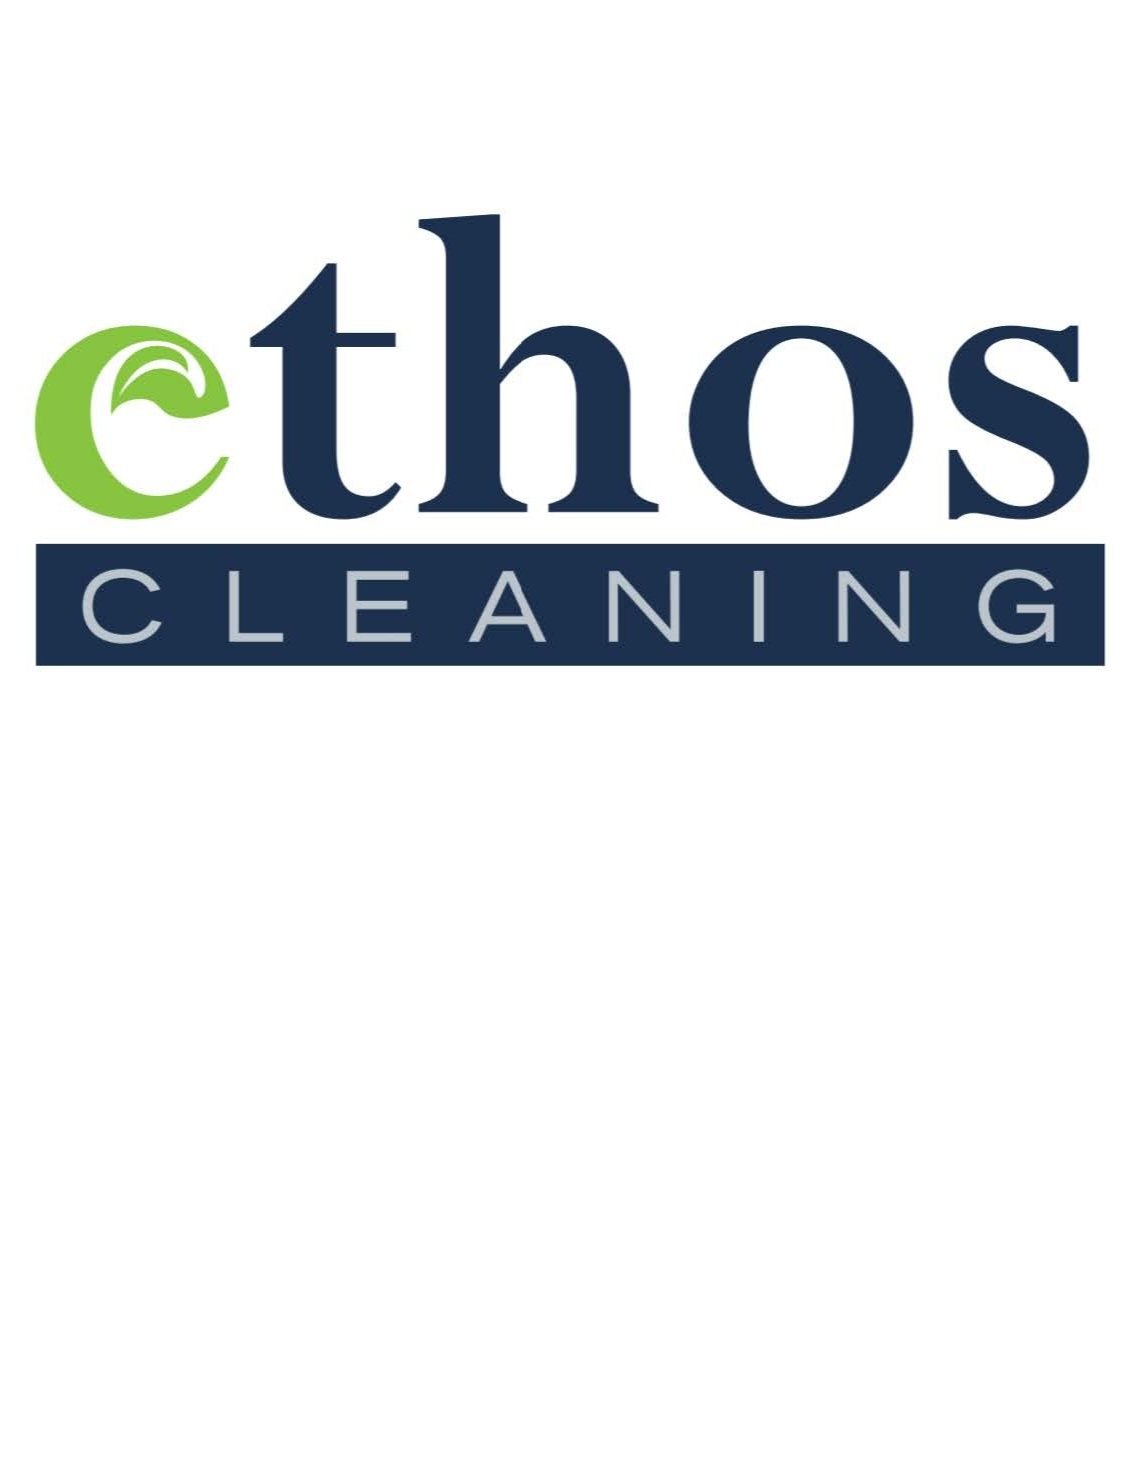 Ethos Cleaning